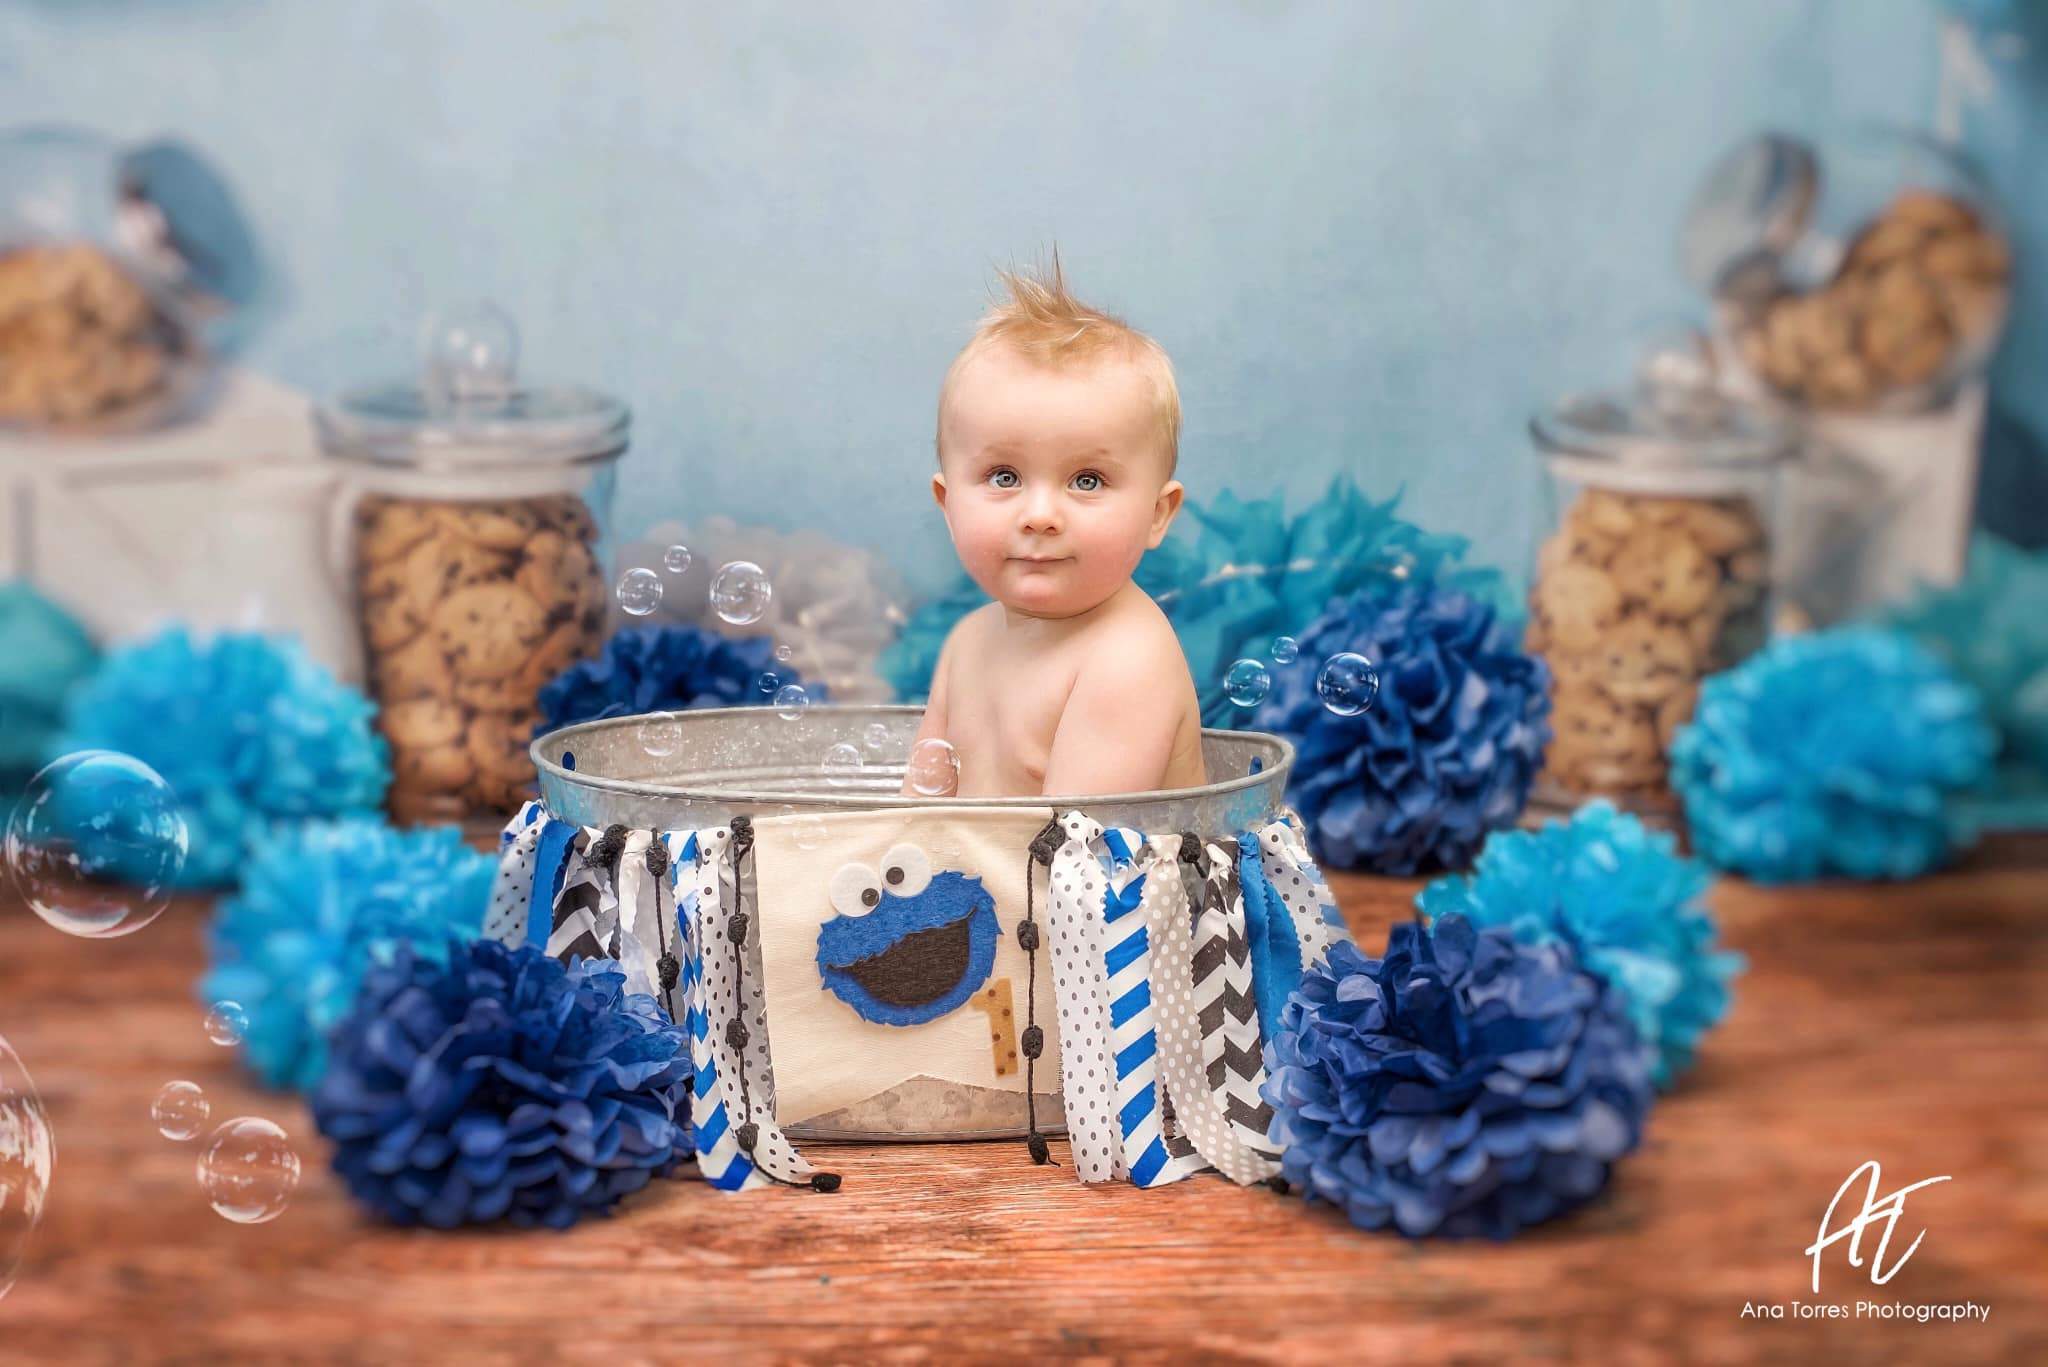 Katebackdrop：Kate Cookie Children Backdrop Designed by Laura Lee Photography